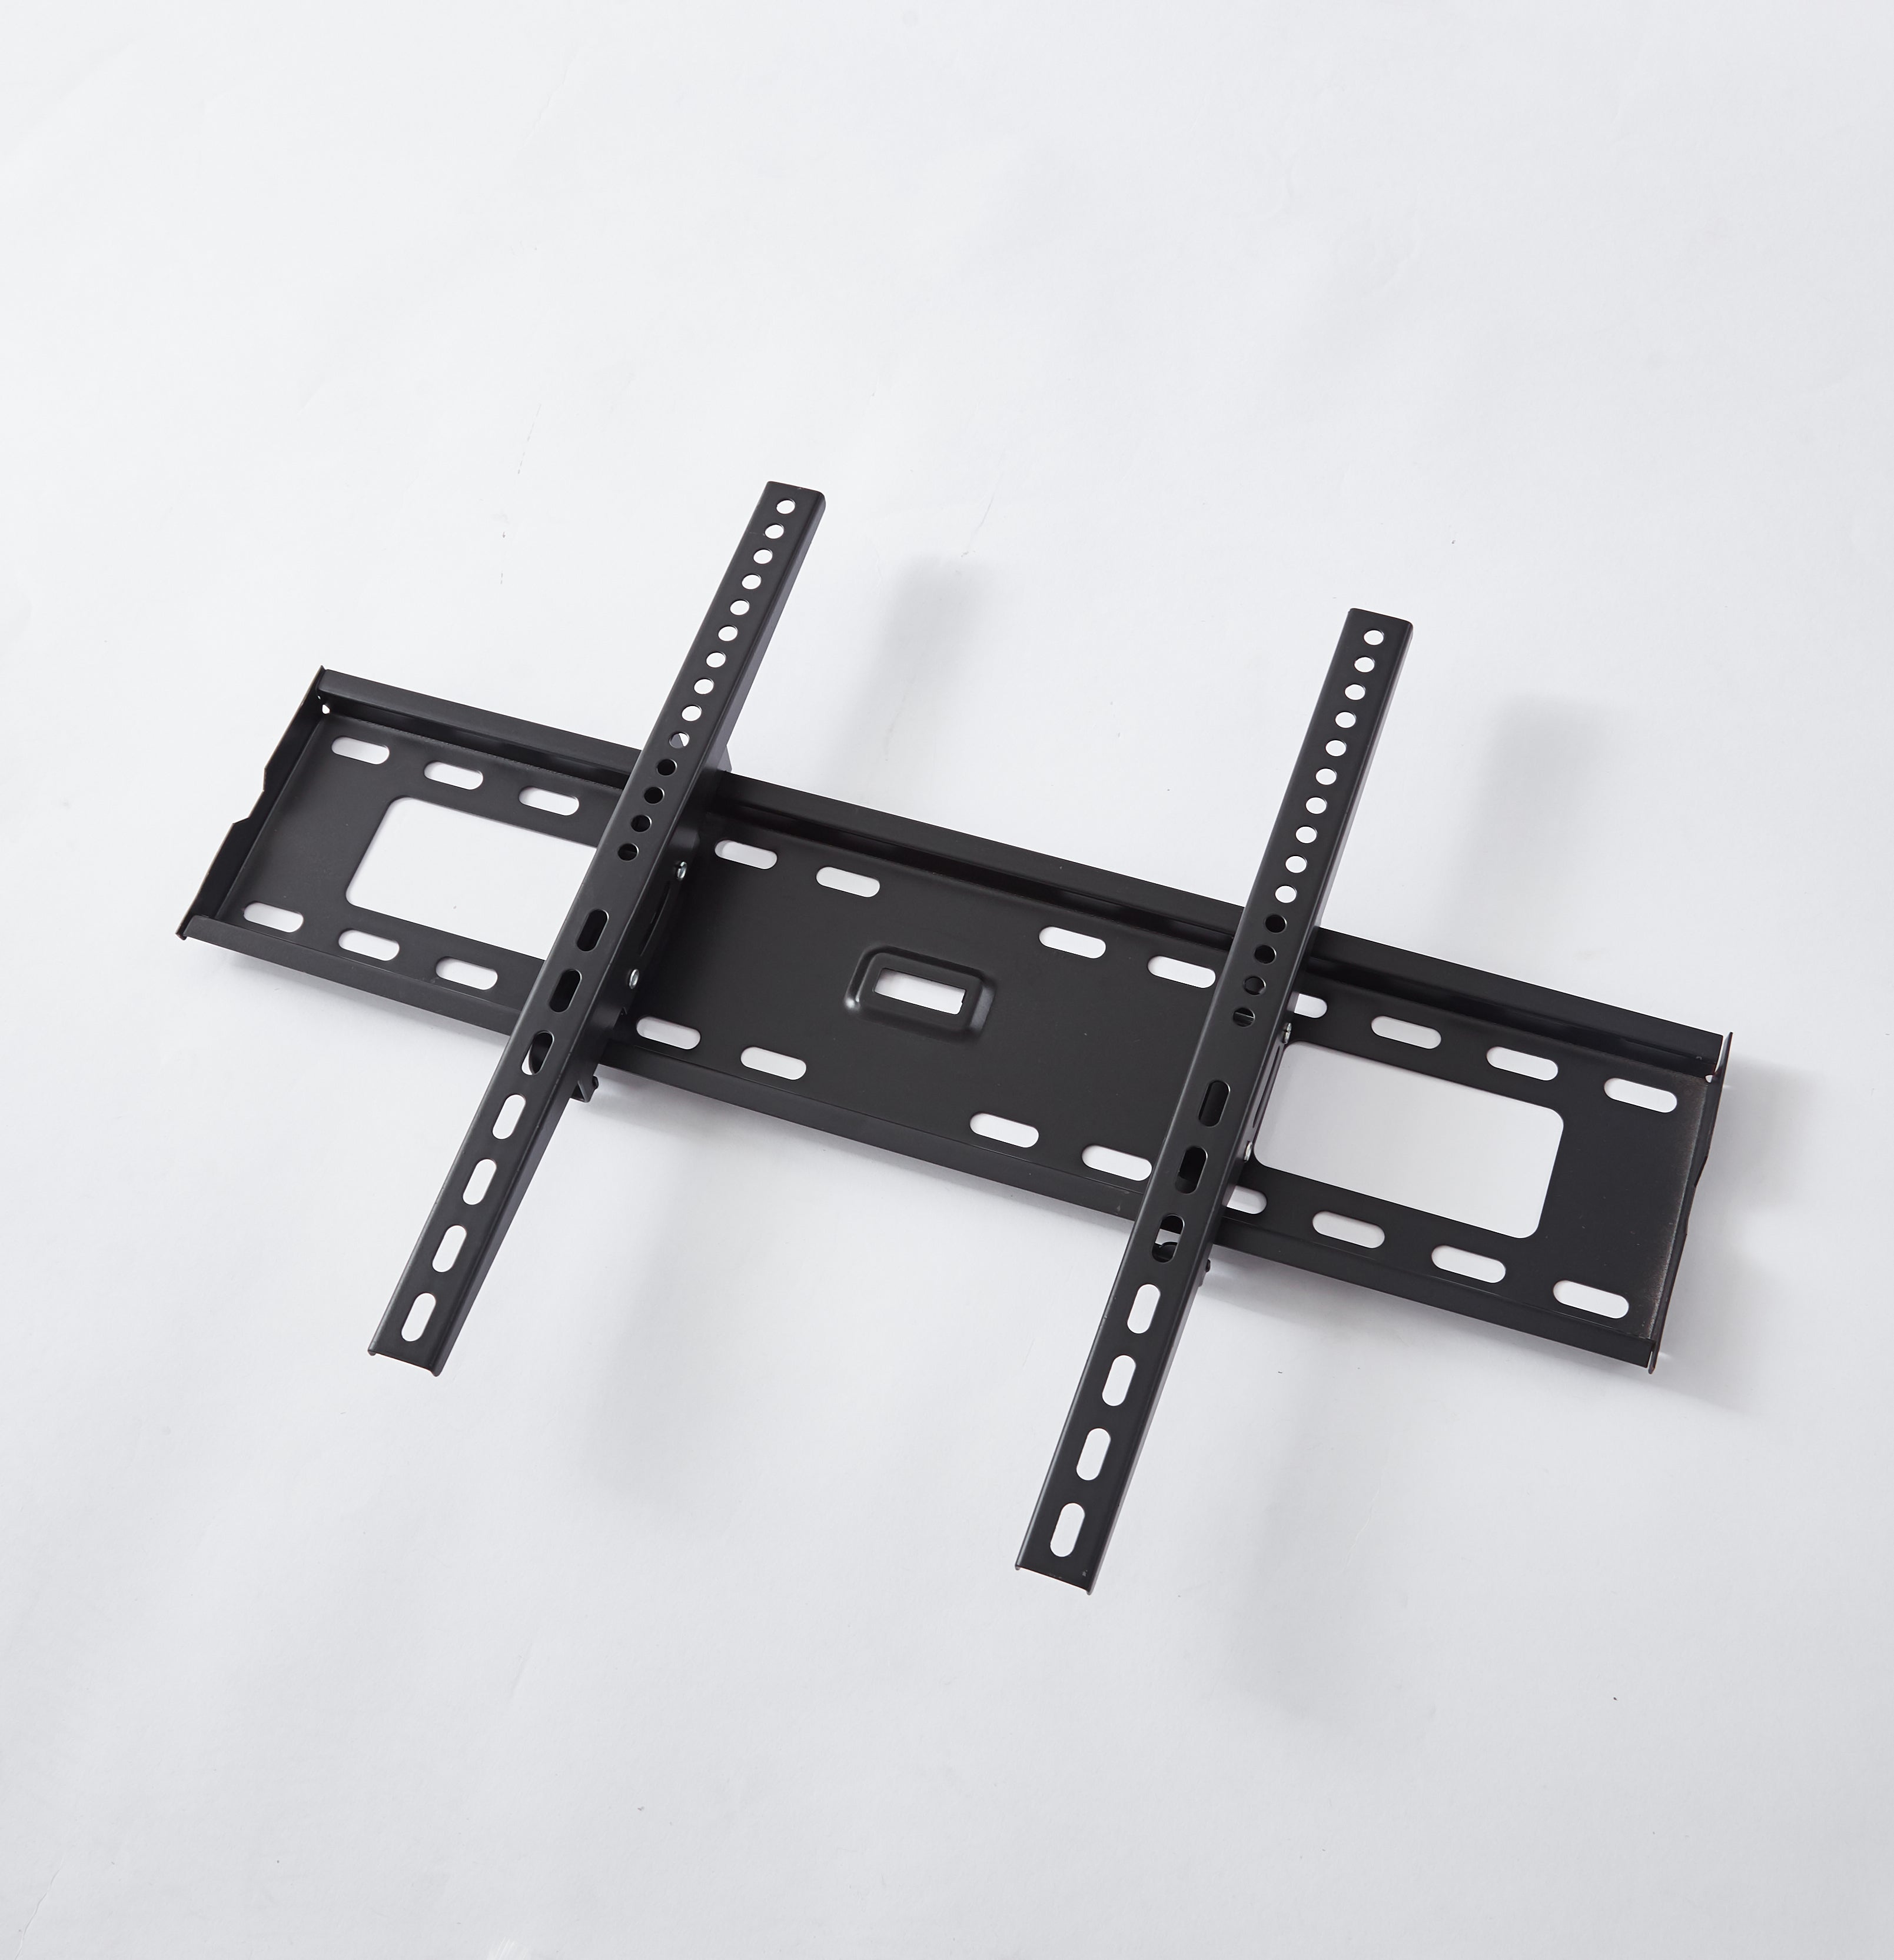 Full Motion TV Wall Bracket Mount for 32 to 70 inch screens2